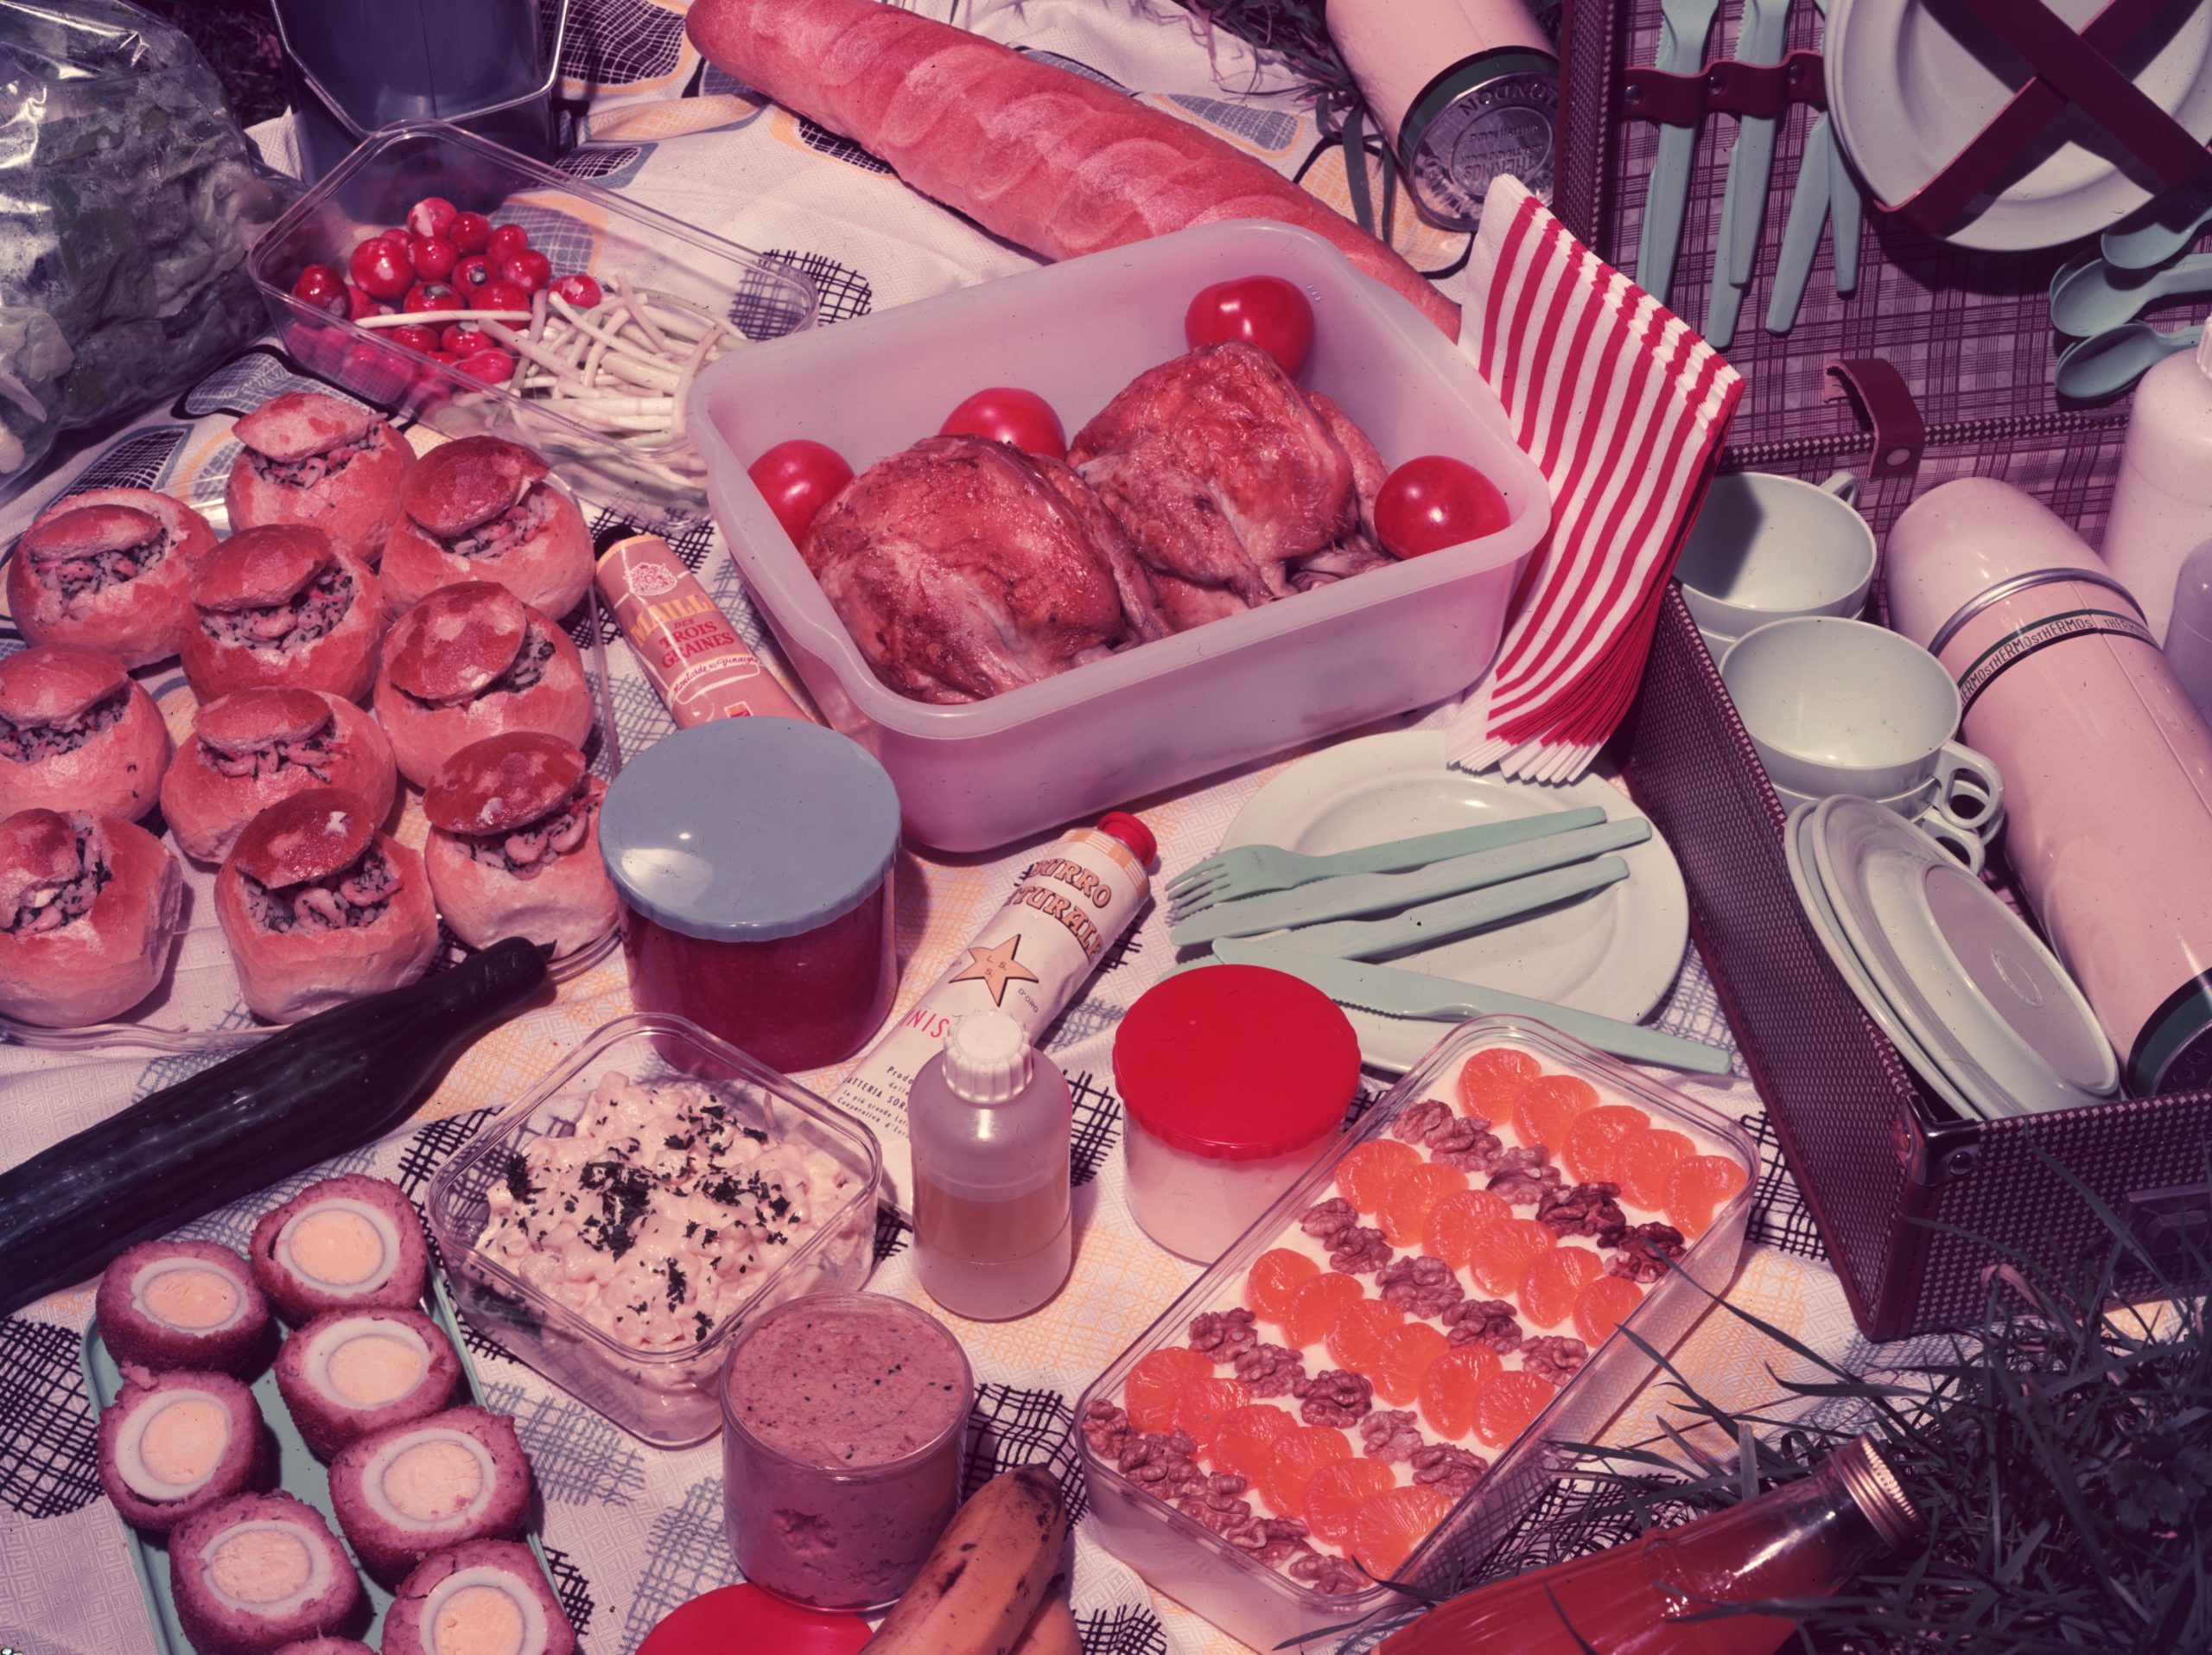 A picnic from 1957, including roast chickens that are much smaller than you'll likely find at the supermarket today. (Photo: Chaloner Woods, Getty Images)